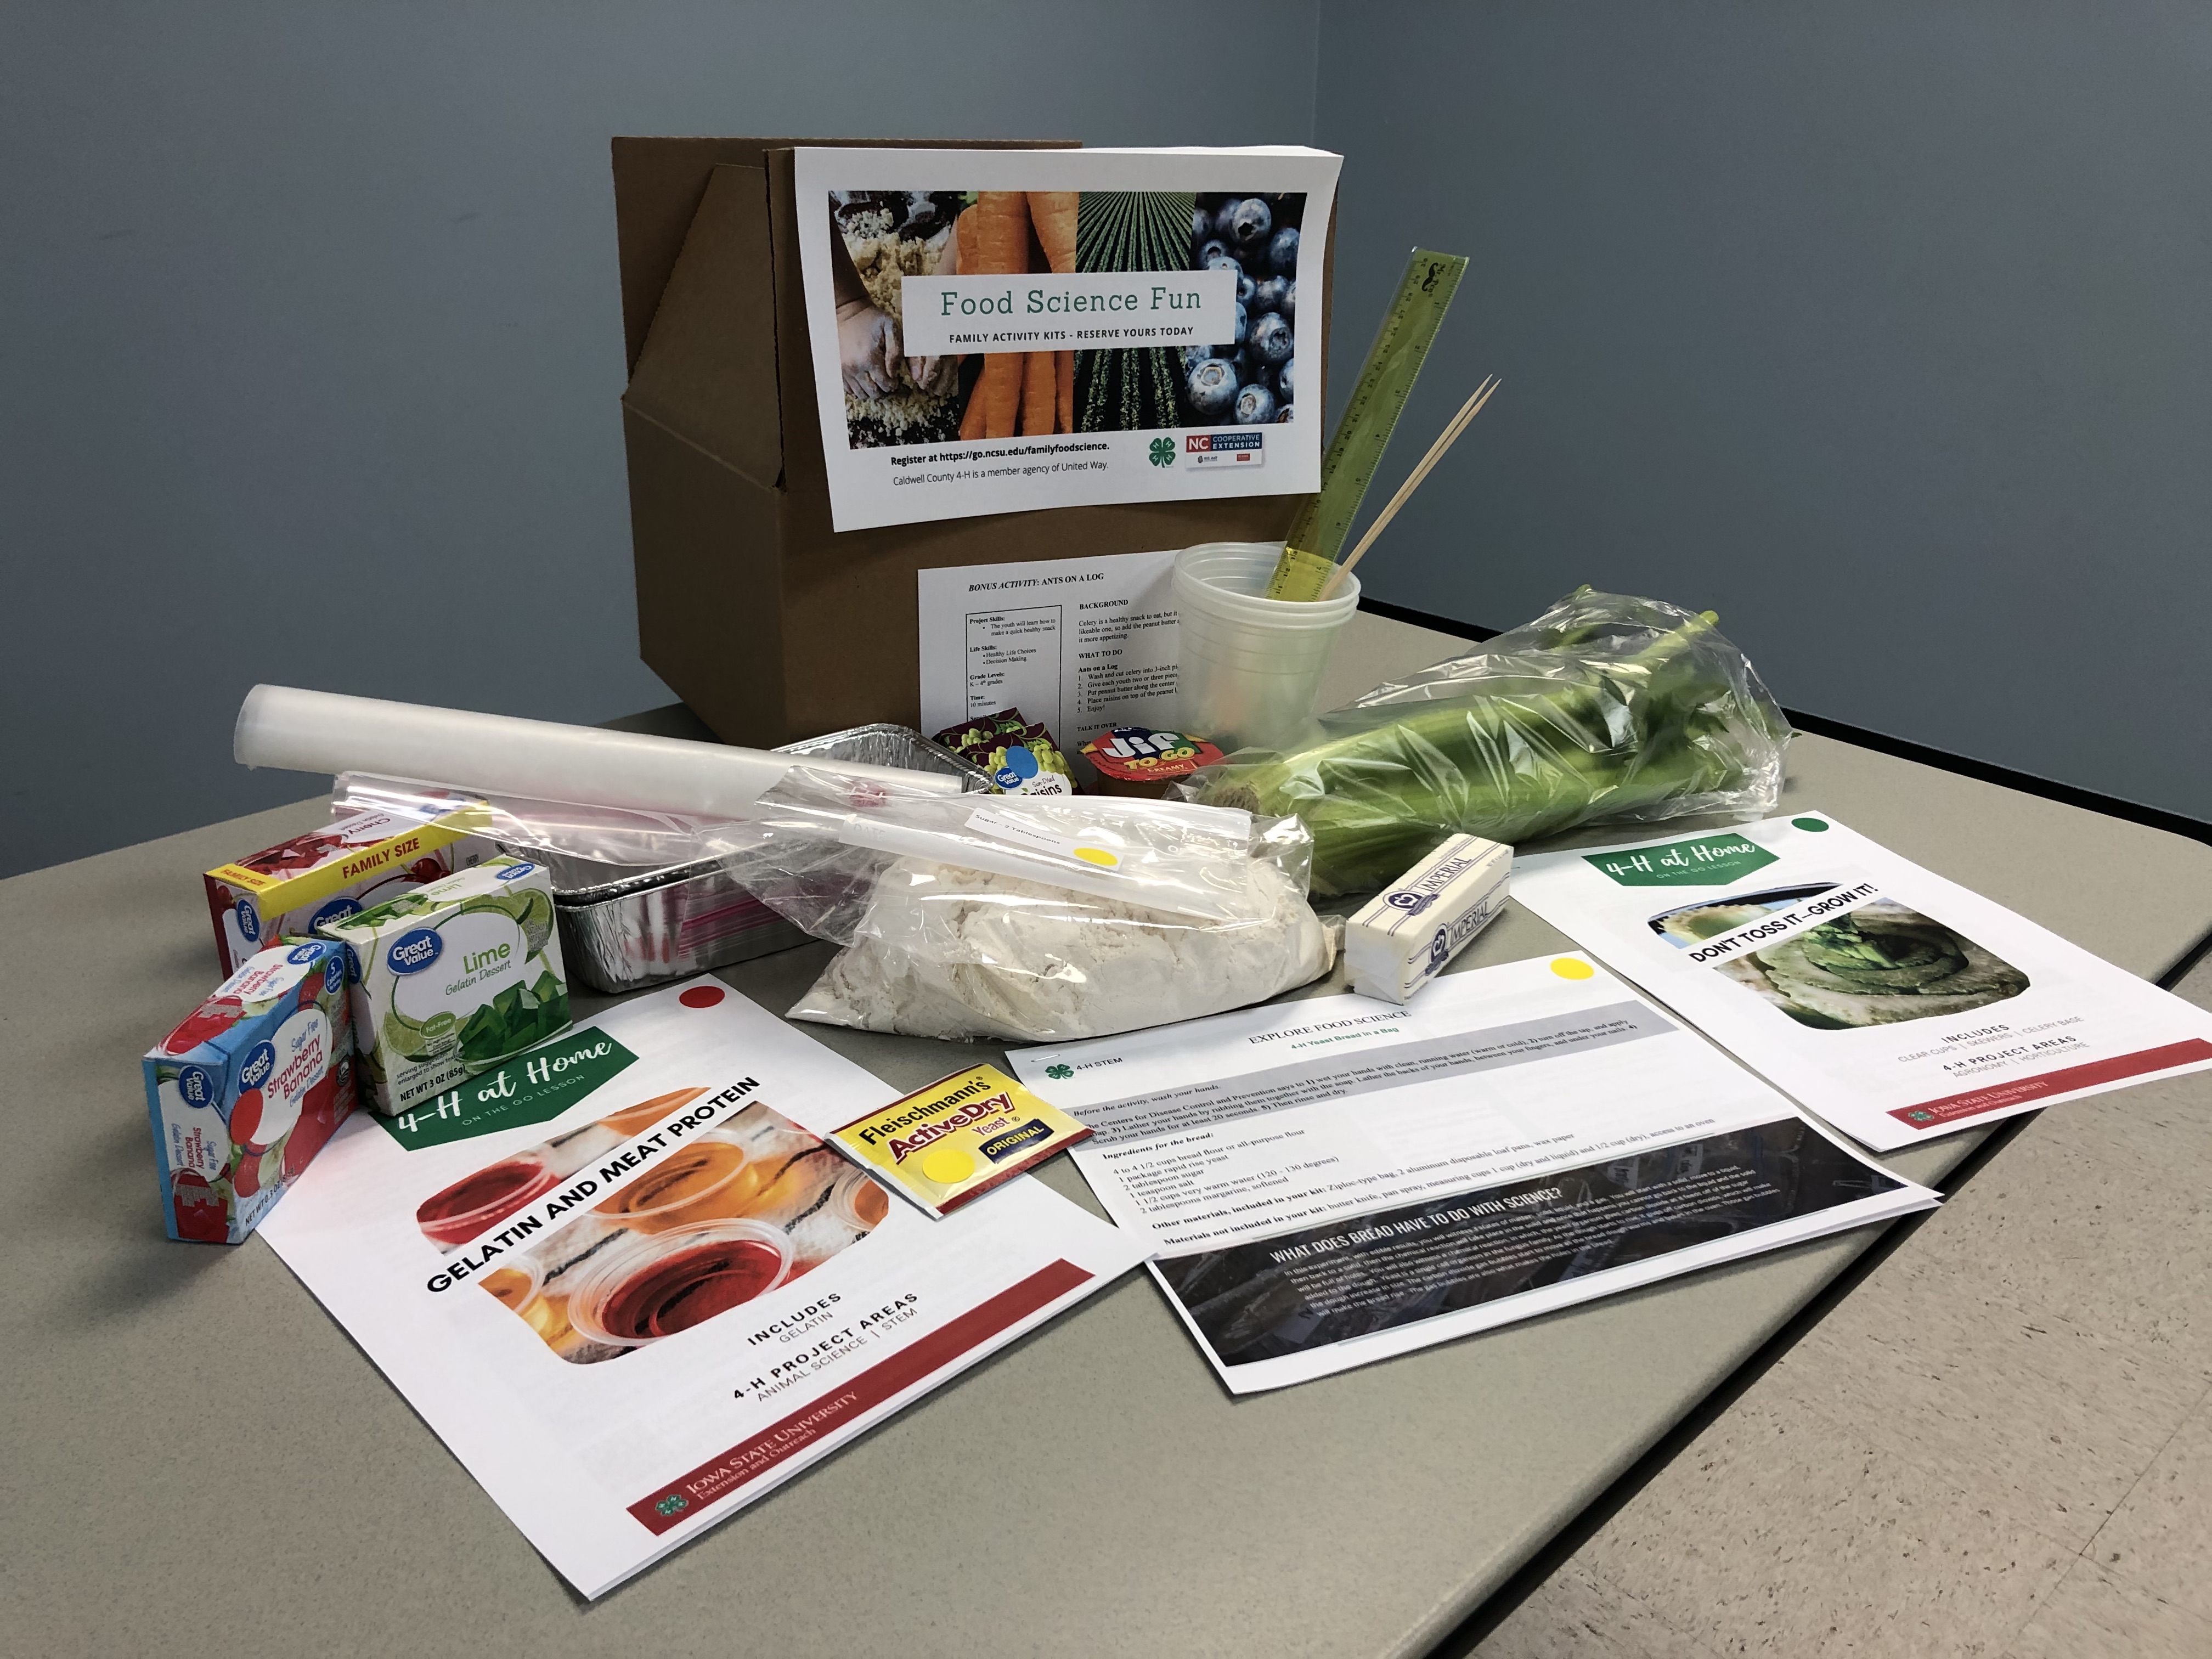 Dozens of local youth are trying something new to them this winter break – food science. The “Food Science Fun” educational activities kit was distributed by Caldwell County 4-H December 16-18, 2020.